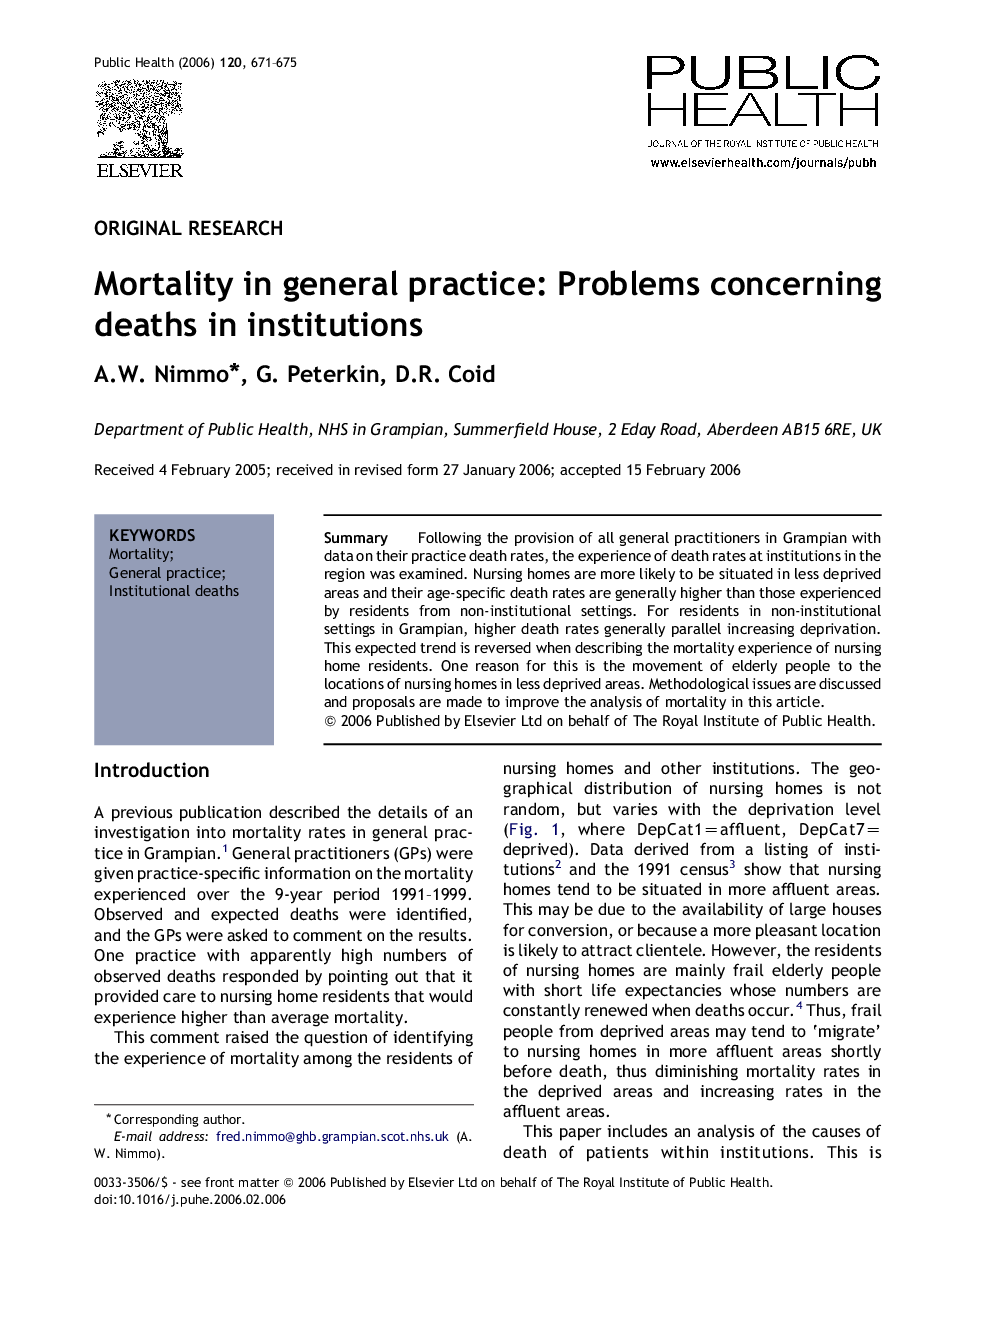 Mortality in general practice: Problems concerning deaths in institutions